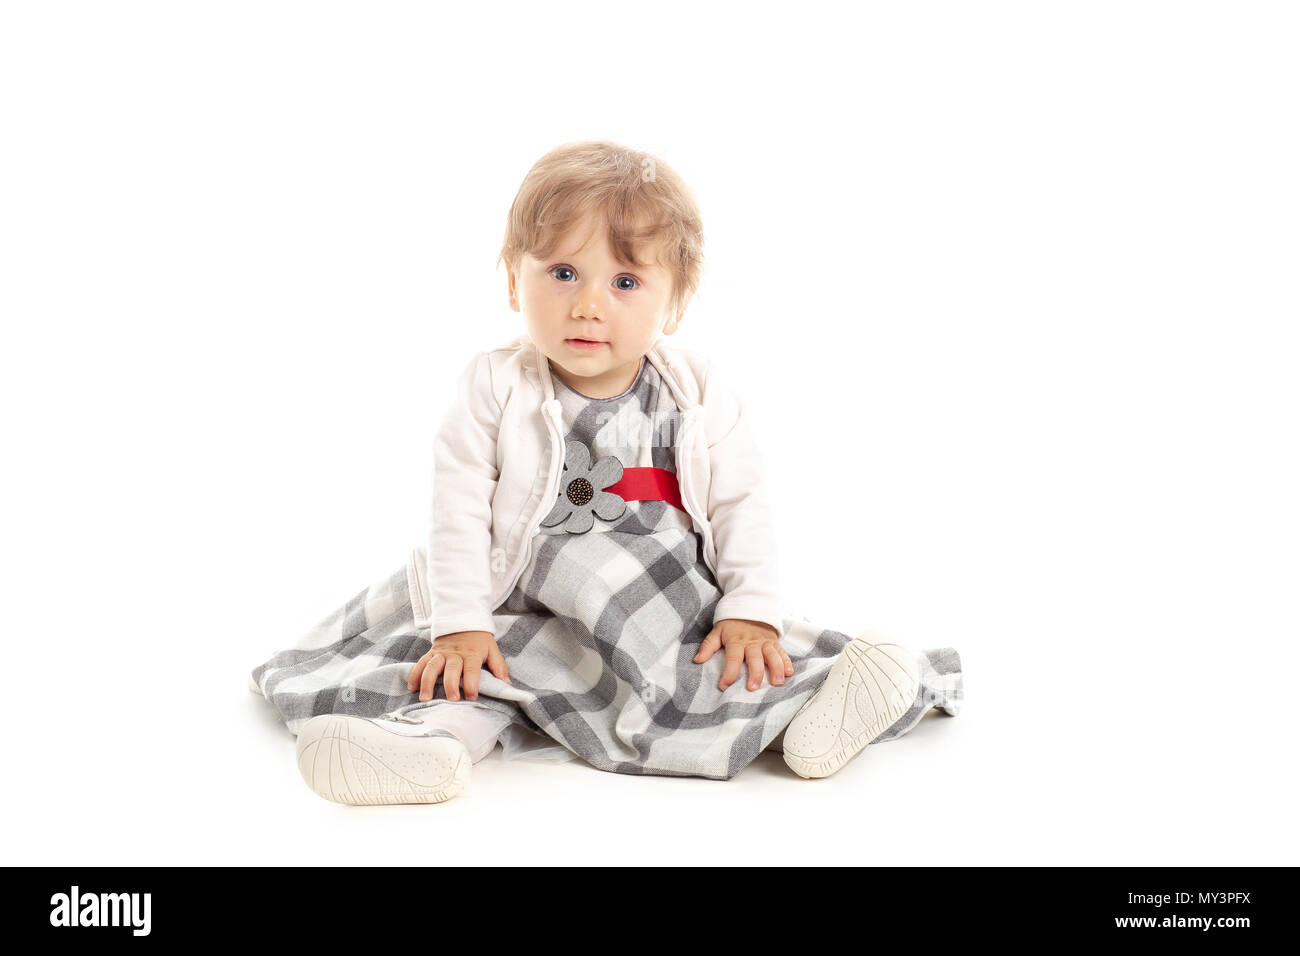 Elegant Happy baby girl 1 year old sitting on the studio floor. White Background. Concept Happiness. Stock Photo